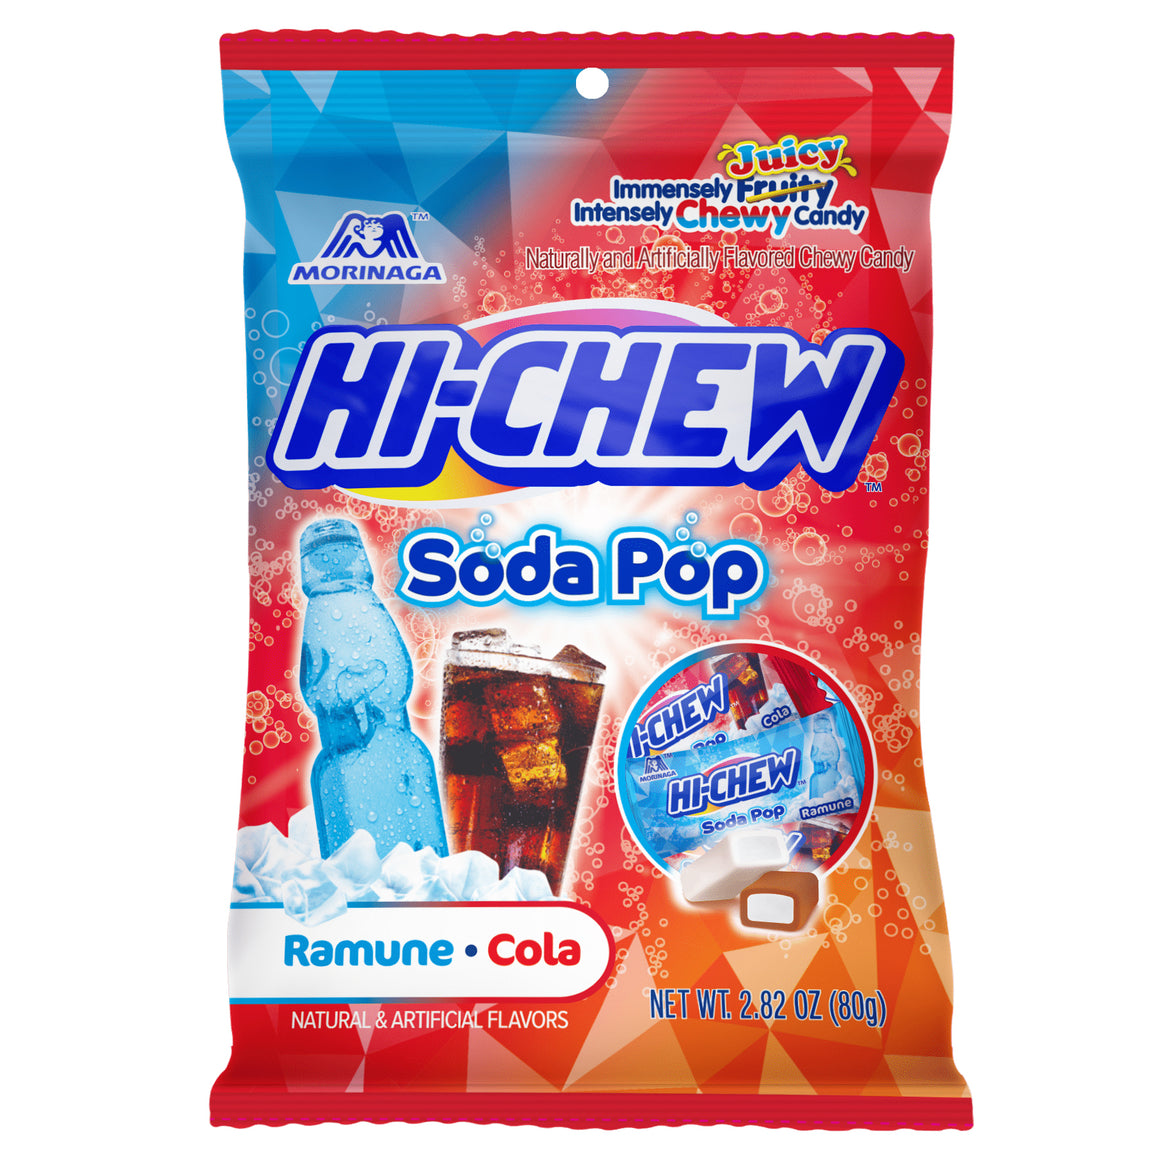 All City Candy Hi-Chew Soda Pop Mix Ramune/Cola Chews - 2.82-oz. Bag Chewy Morinaga & Company For fresh candy and great service, visit www.allcitycandy.com